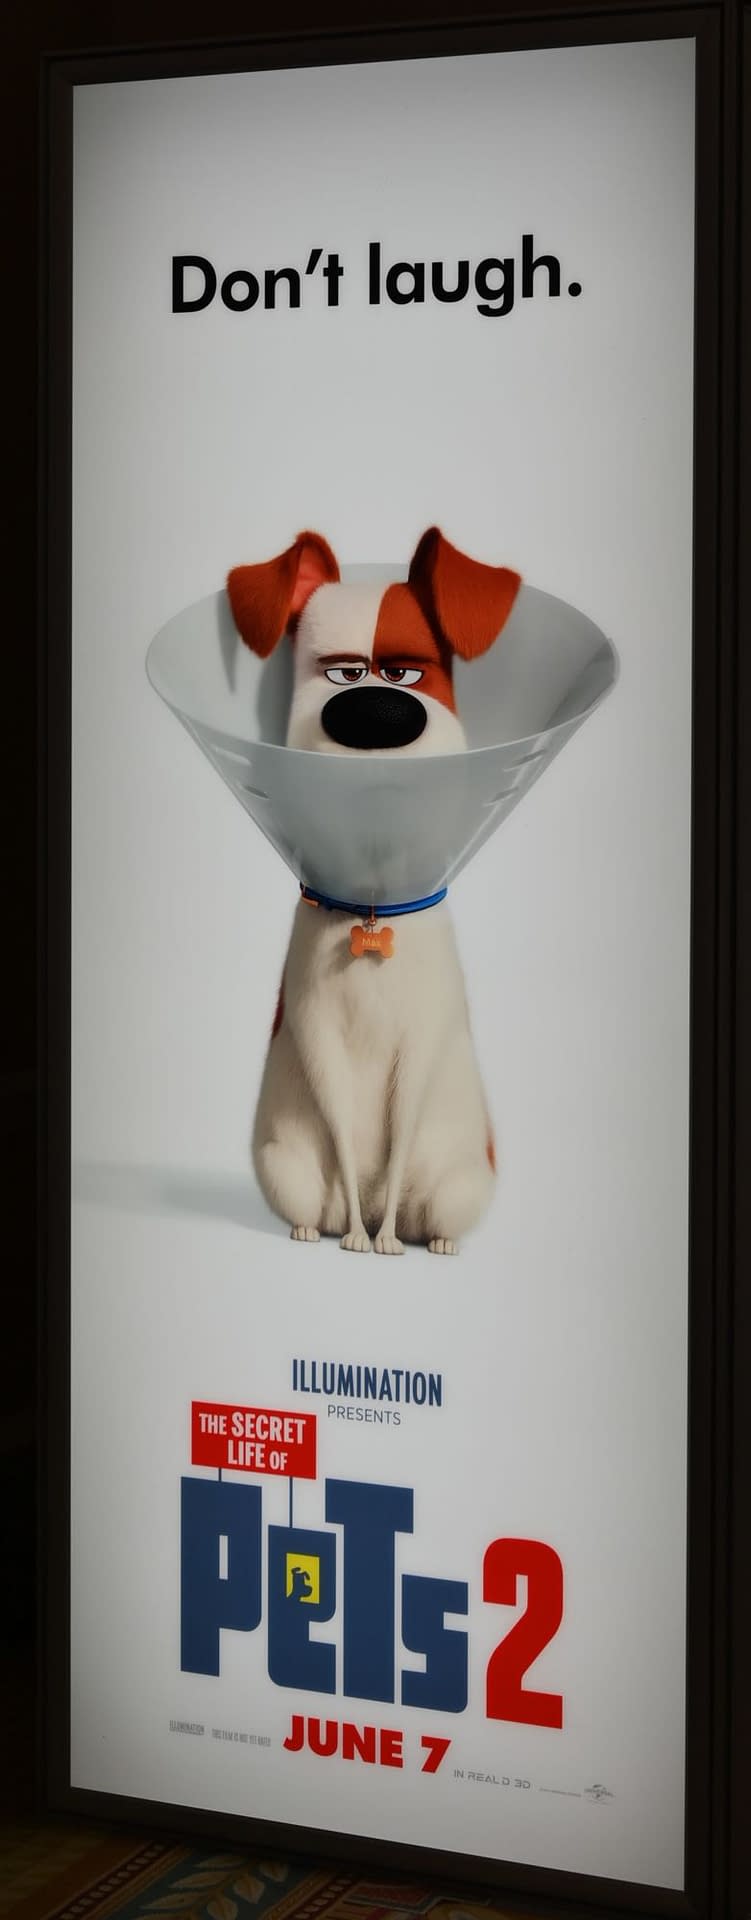 [CinemaCon 2019] 10 Character Posters from The Secret Life of Pets 2